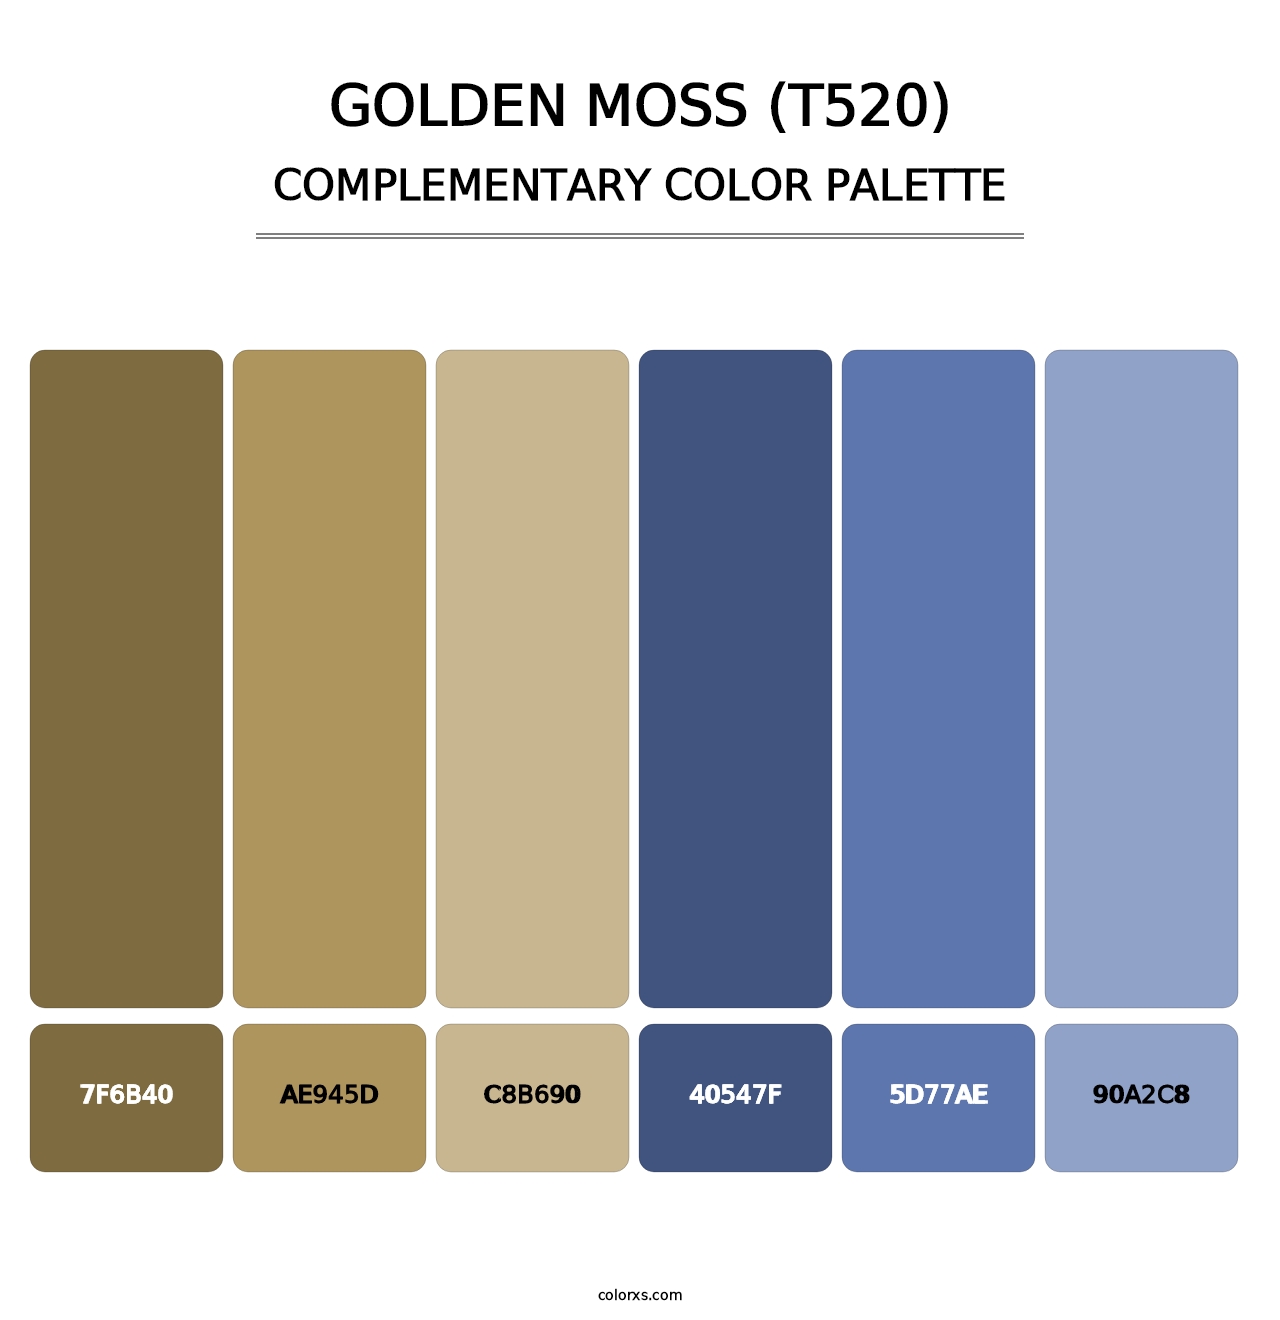 Golden Moss (T520) - Complementary Color Palette